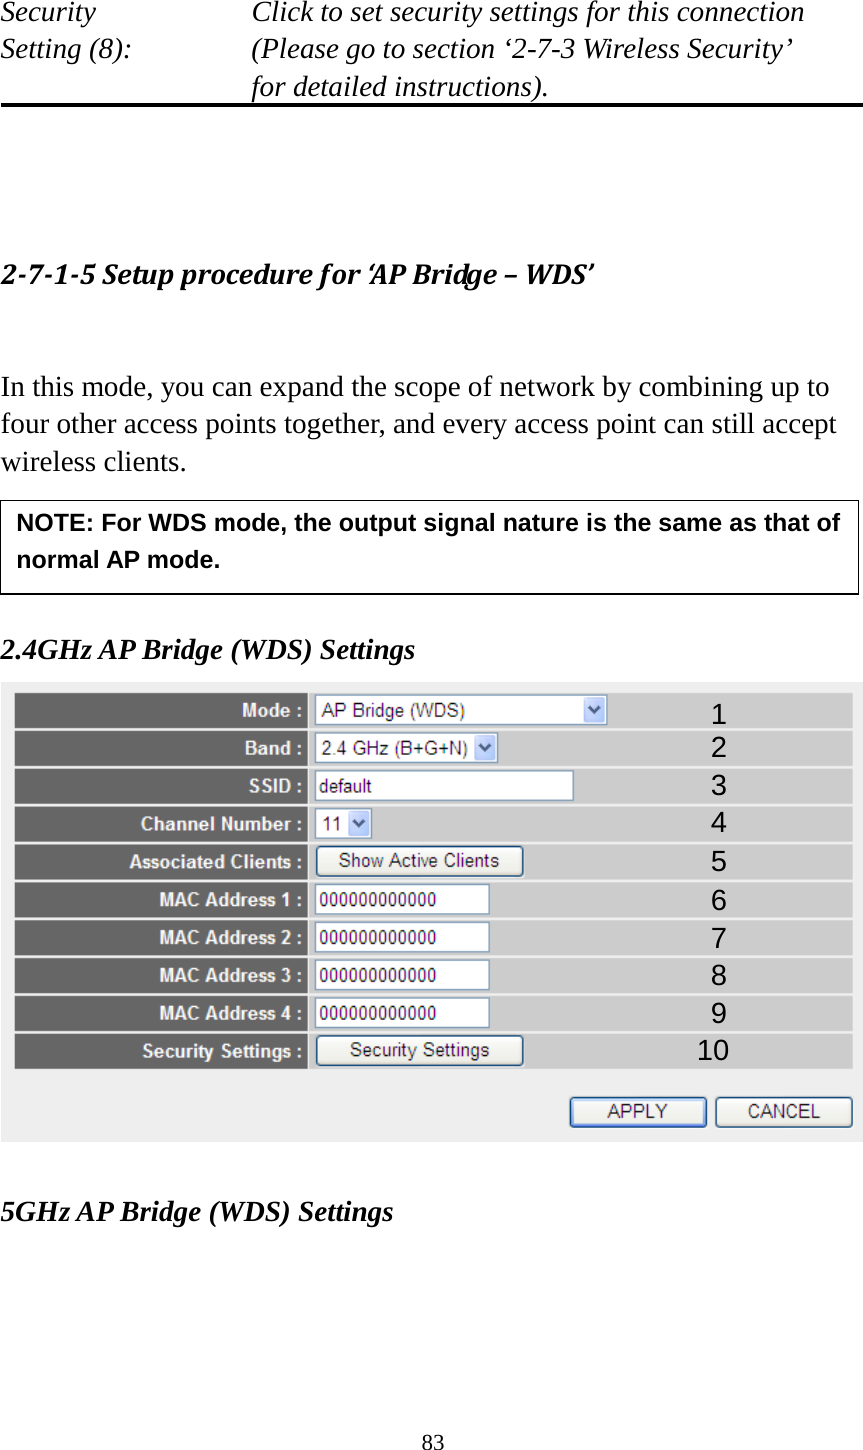 83  Security    Click to set security settings for this connection Setting (8):  (Please go to section ‘2-7-3 Wireless Security’   for detailed instructions).    2-7-1-5 Setup procedure for ‘AP Bridge – WDS’  In this mode, you can expand the scope of network by combining up to four other access points together, and every access point can still accept wireless clients.     2.4GHz AP Bridge (WDS) Settings   5GHz AP Bridge (WDS) Settings 1 2 3 4 5 7 8 6 9 10 NOTE: For WDS mode, the output signal nature is the same as that of normal AP mode.   